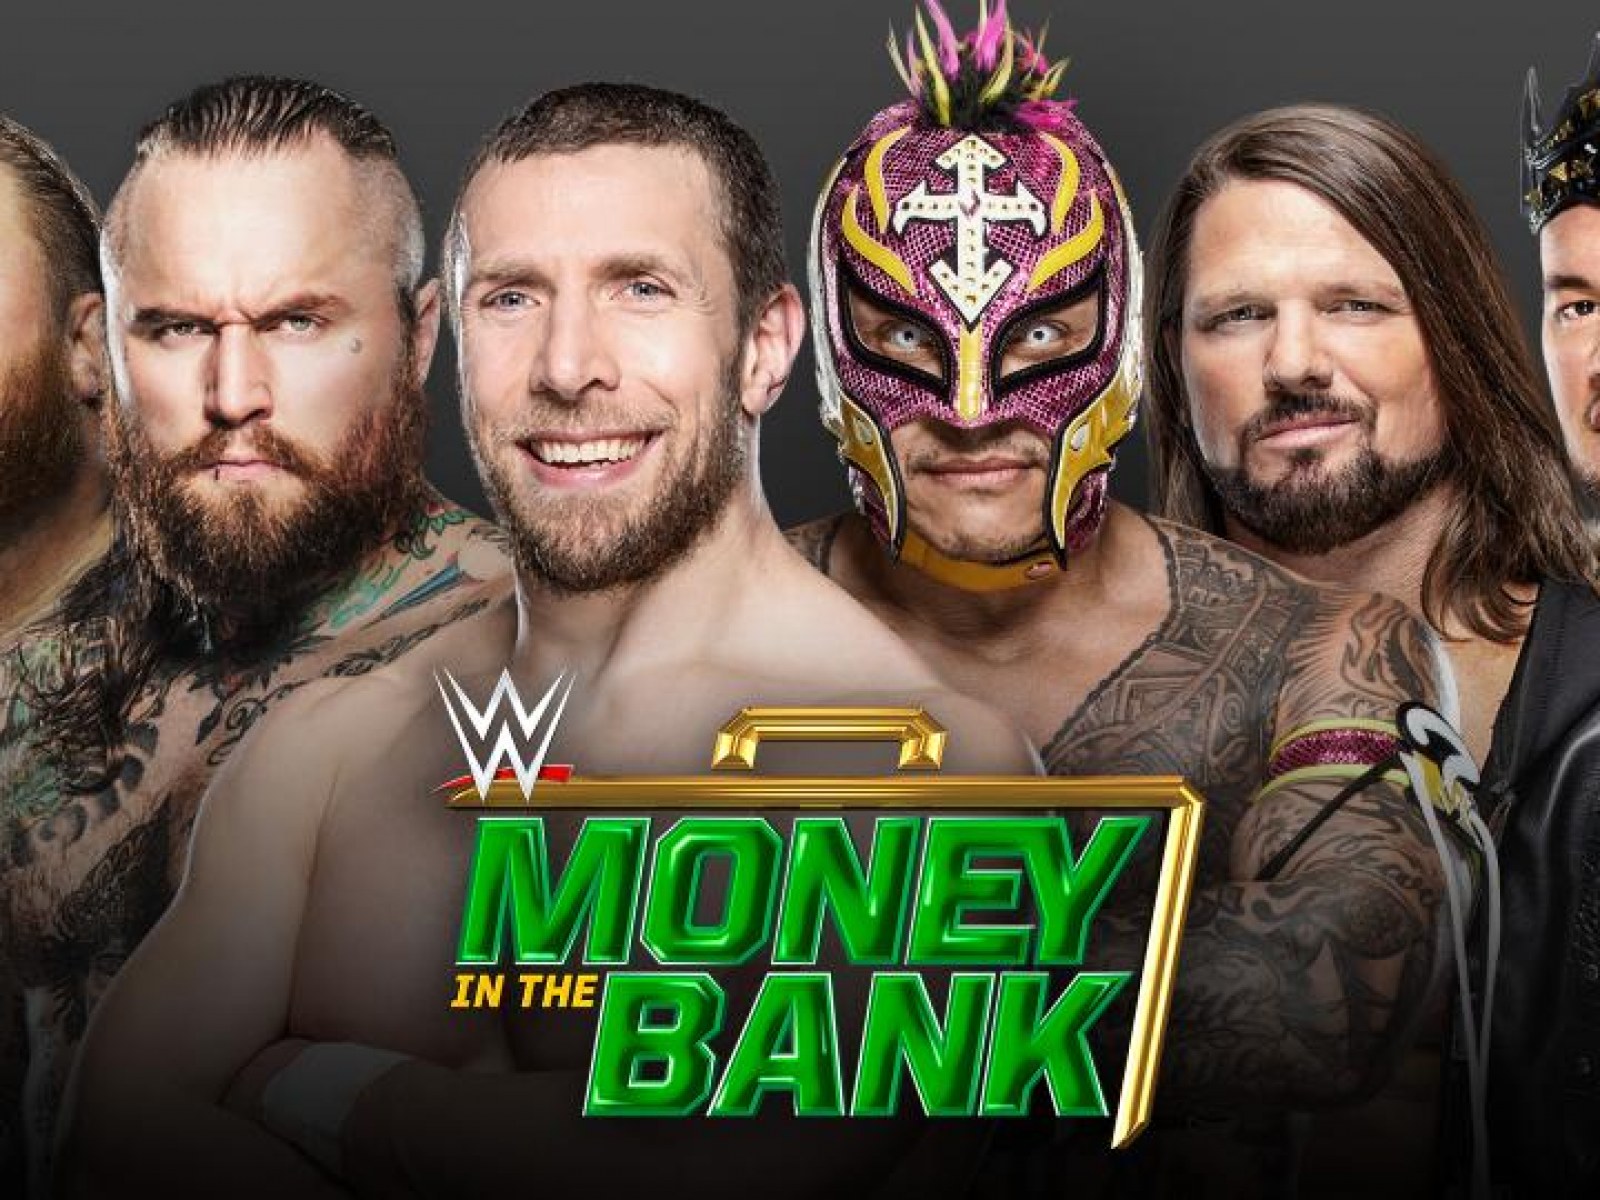 WWE 'Money in the Bank' 2020 Predictions: Who We Think Wins Each Match This Sunday